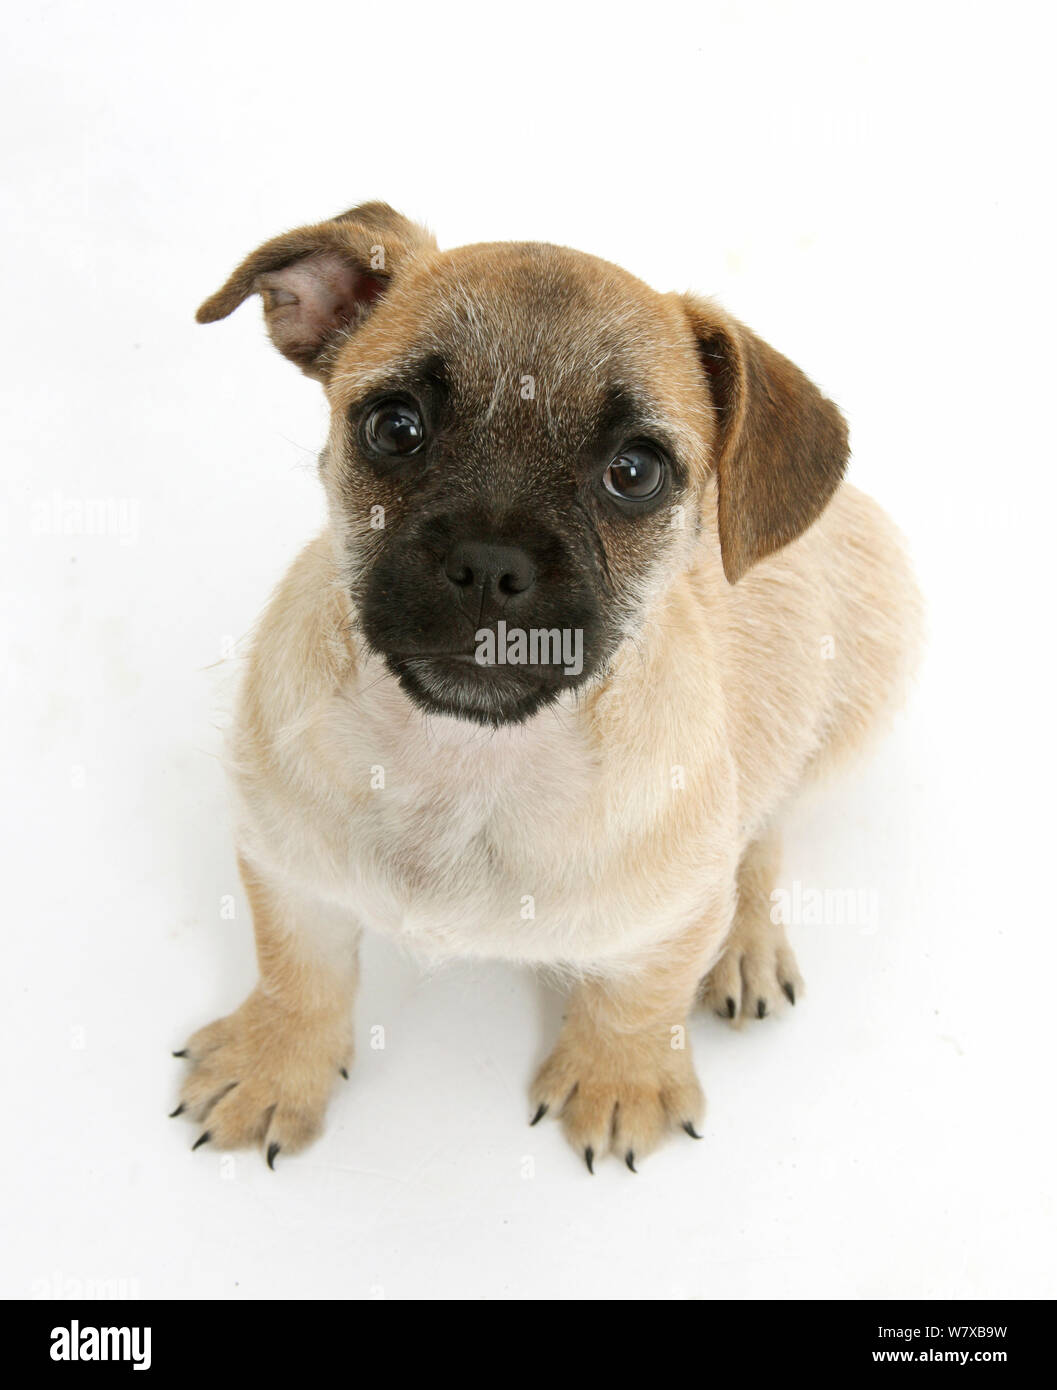 Pug x Jack Russell Terrier 'Jug' puppy, age 8 weeks. Stock Photo